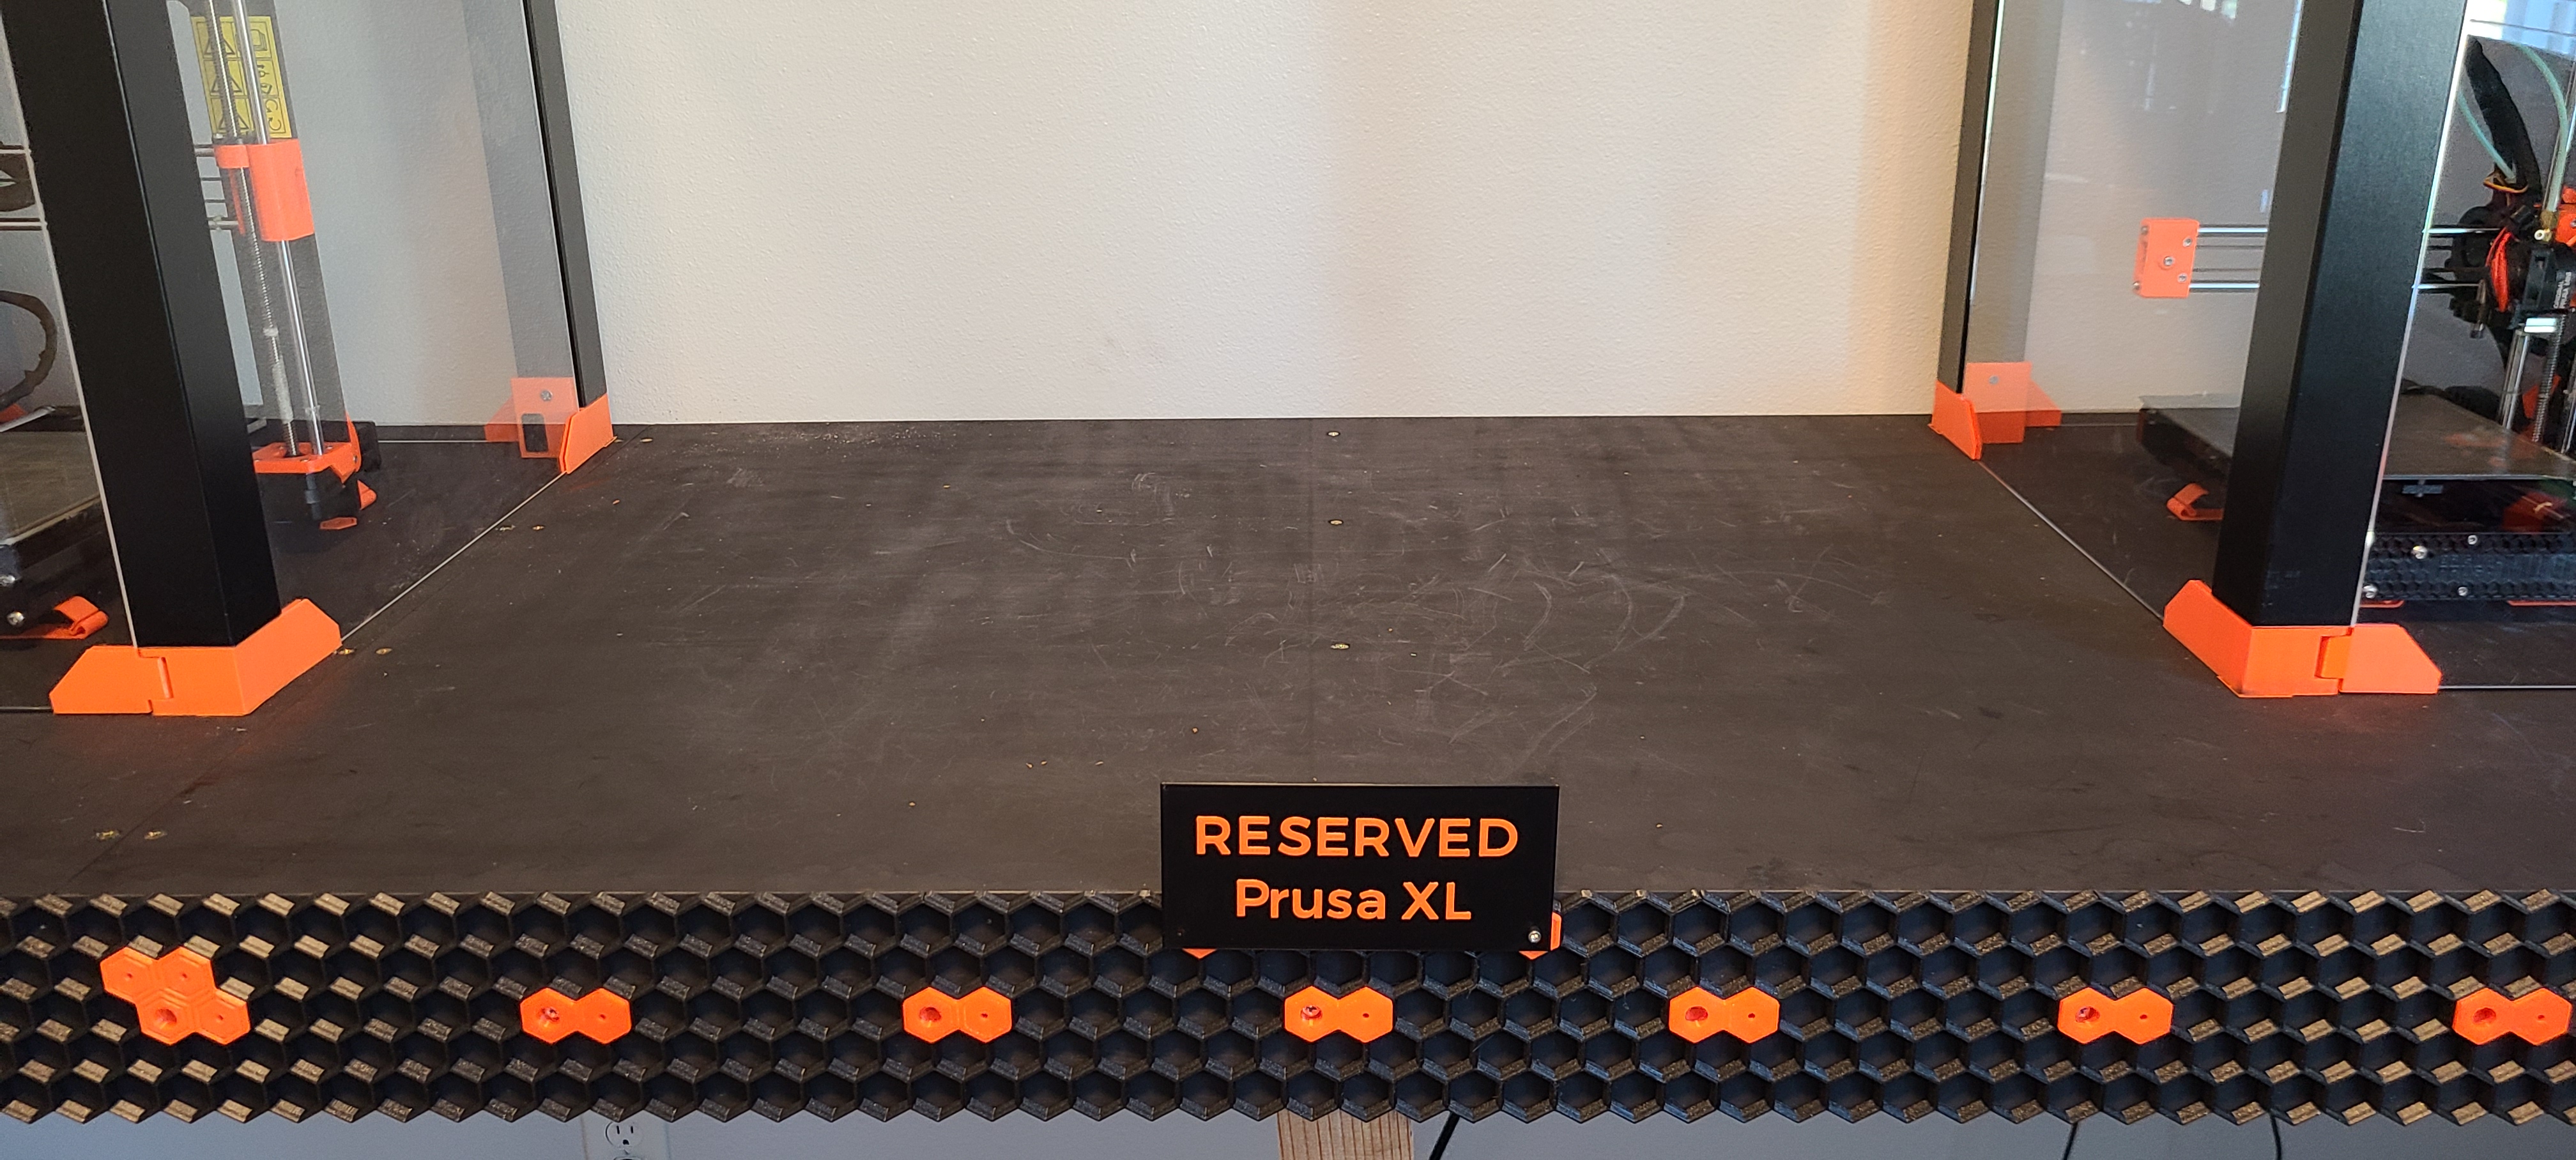 Reserved Prusa XL